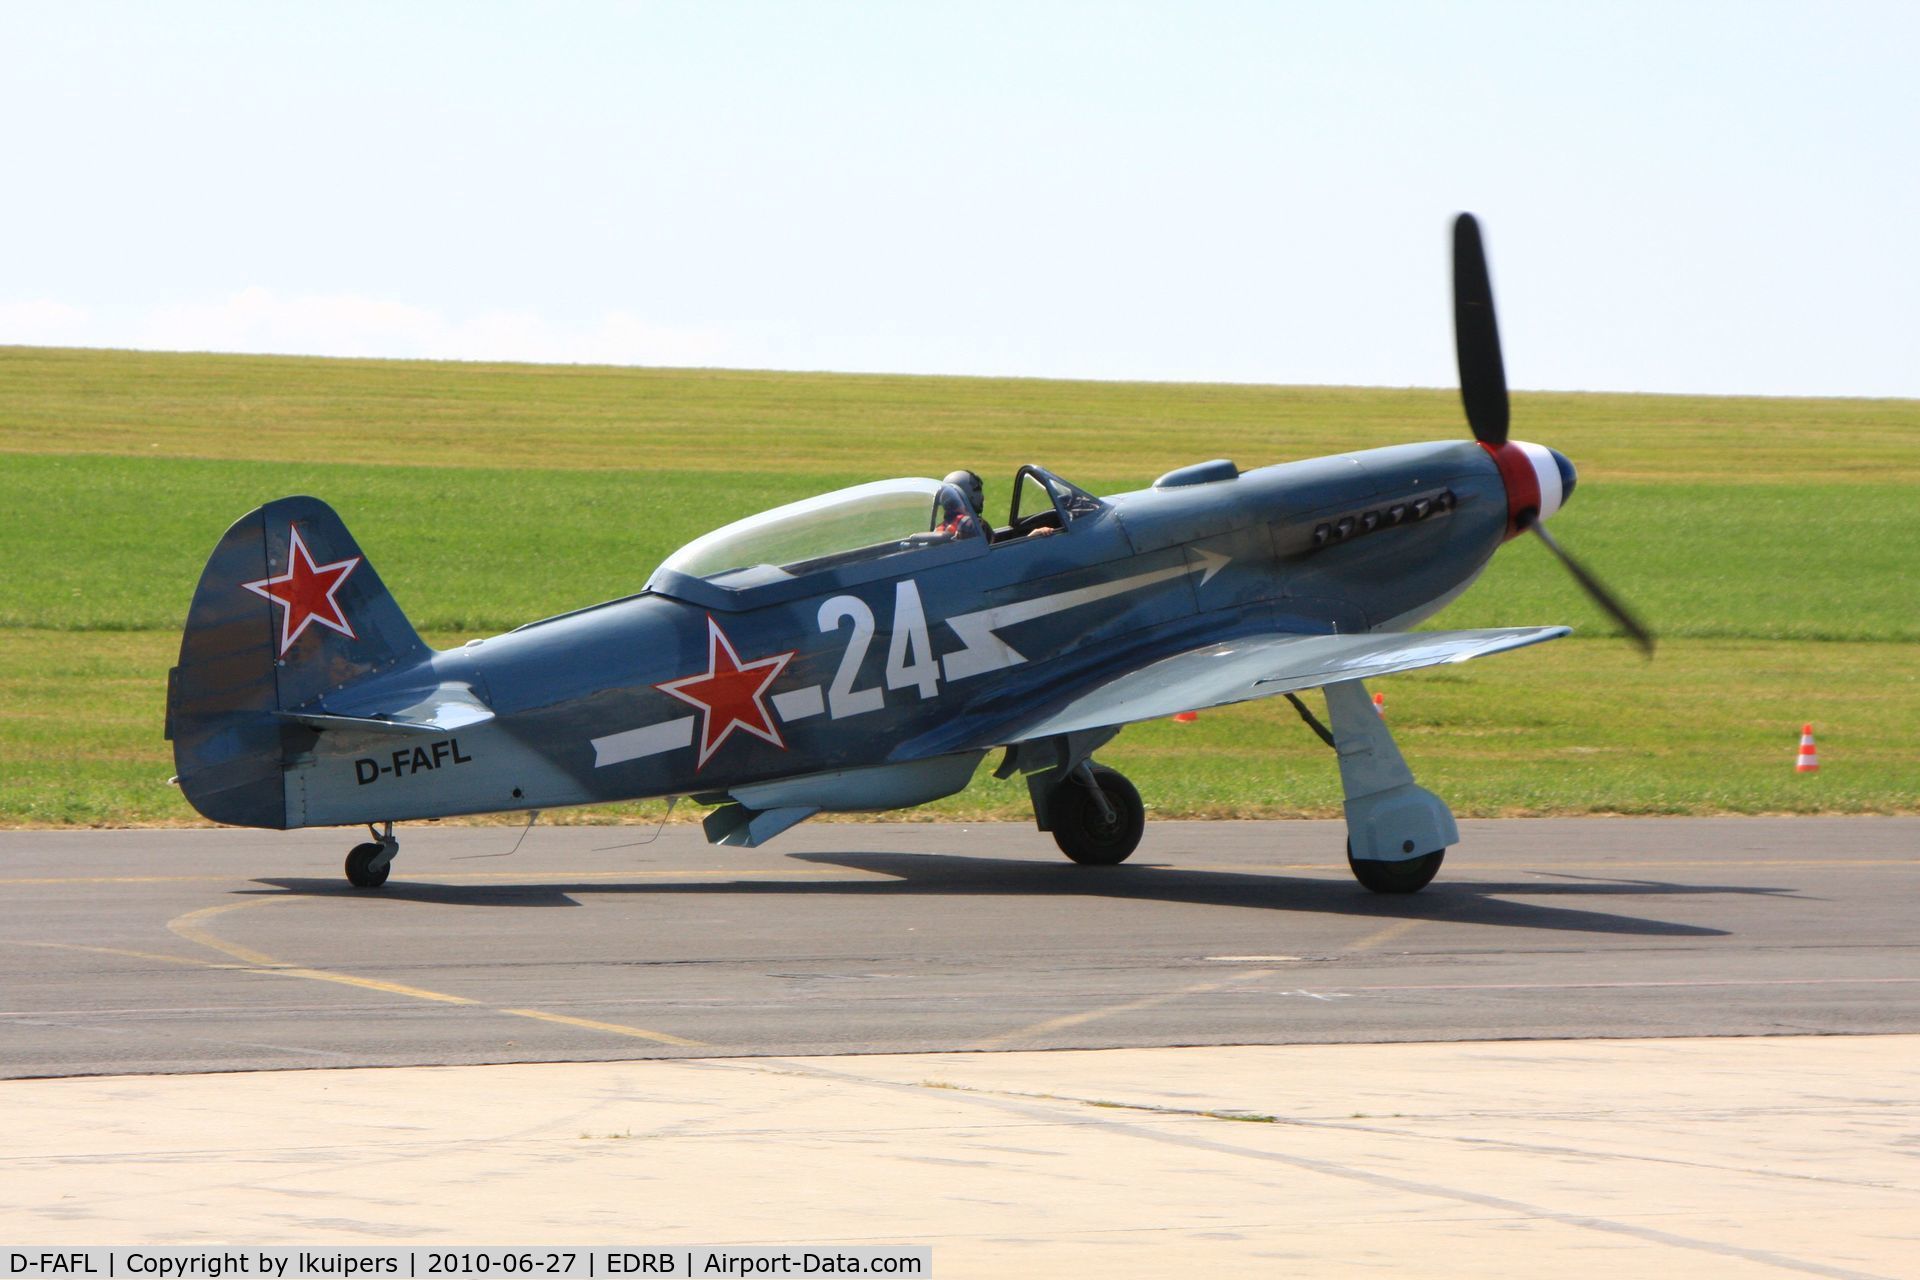 D-FAFL, 2002 Yakovlev Yak-3M C/N 0470110, Taxiing after display at the Luxemburg Airshow in 2010